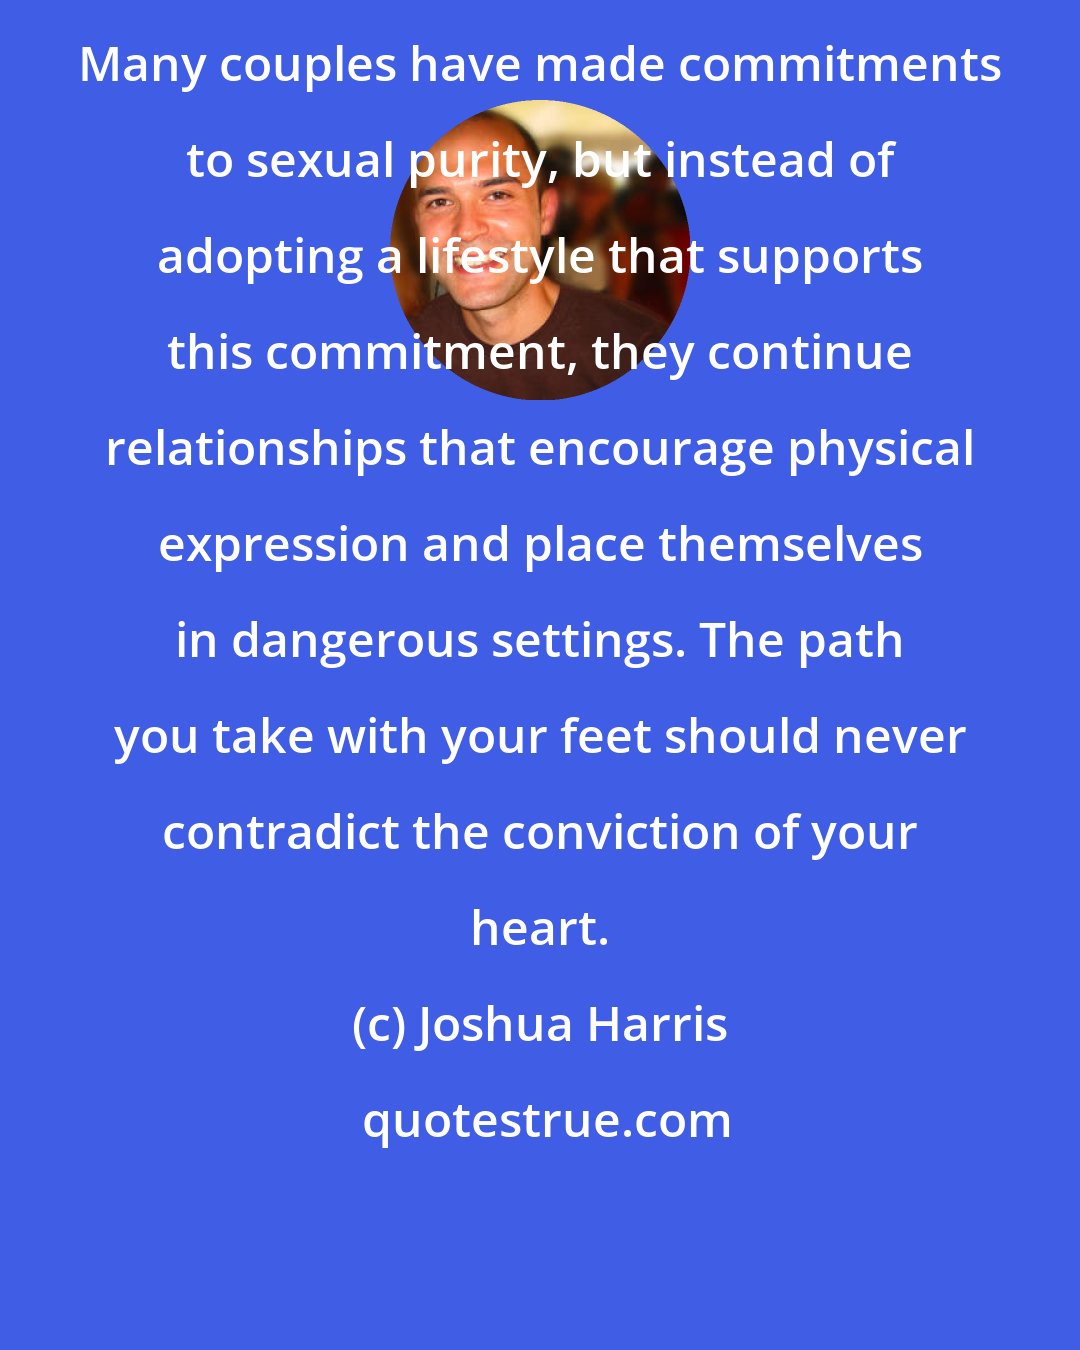 Joshua Harris: Many couples have made commitments to sexual purity, but instead of adopting a lifestyle that supports this commitment, they continue relationships that encourage physical expression and place themselves in dangerous settings. The path you take with your feet should never contradict the conviction of your heart.